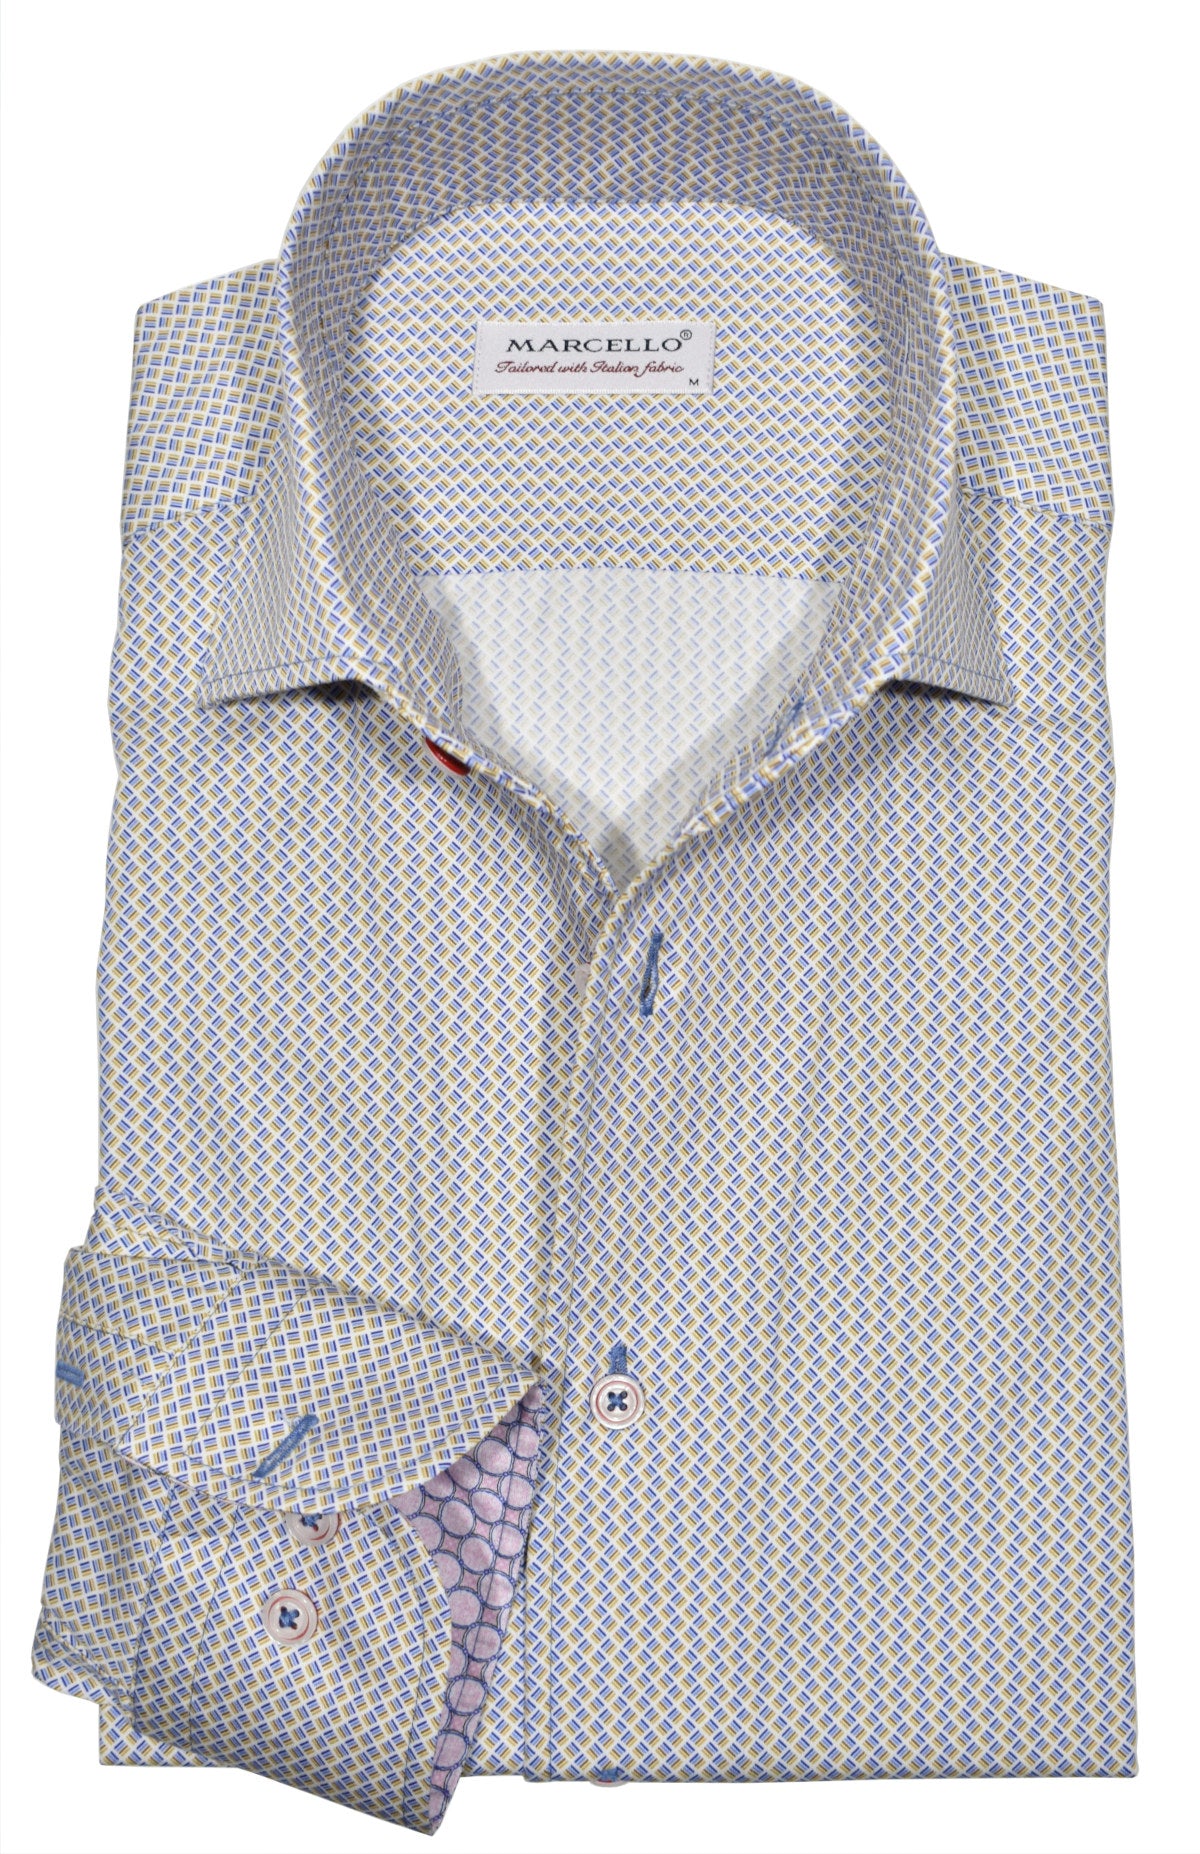 The Marcello exclusive design is like no other, creating a dignified look with a collar that stands perfectly whether worn alone or under a sport coat. Its unique placket ensures a smooth, crisp appearance.  Luxurious cotton fabric. Dashed diamond pattern in blue, maize and gold tones. Style W853R